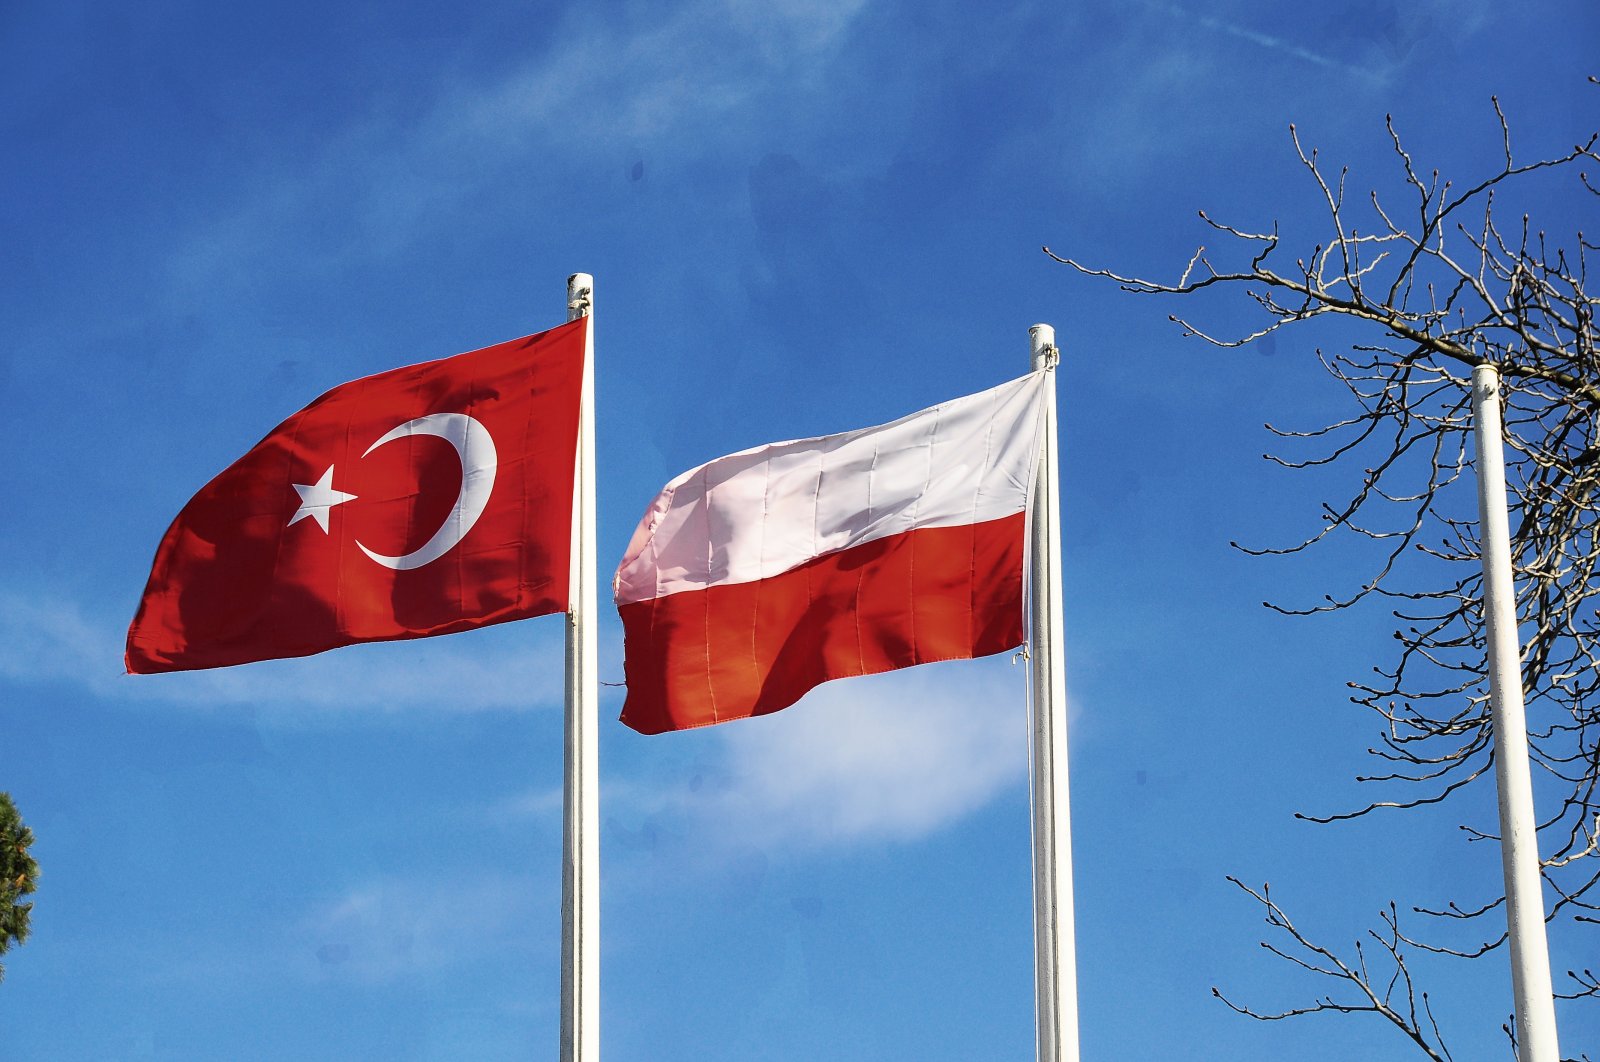 The flags of Turkey and Poland wave in the sky in Polonezköy, Istanbul, Turkey. (Photo by Shutterstock)